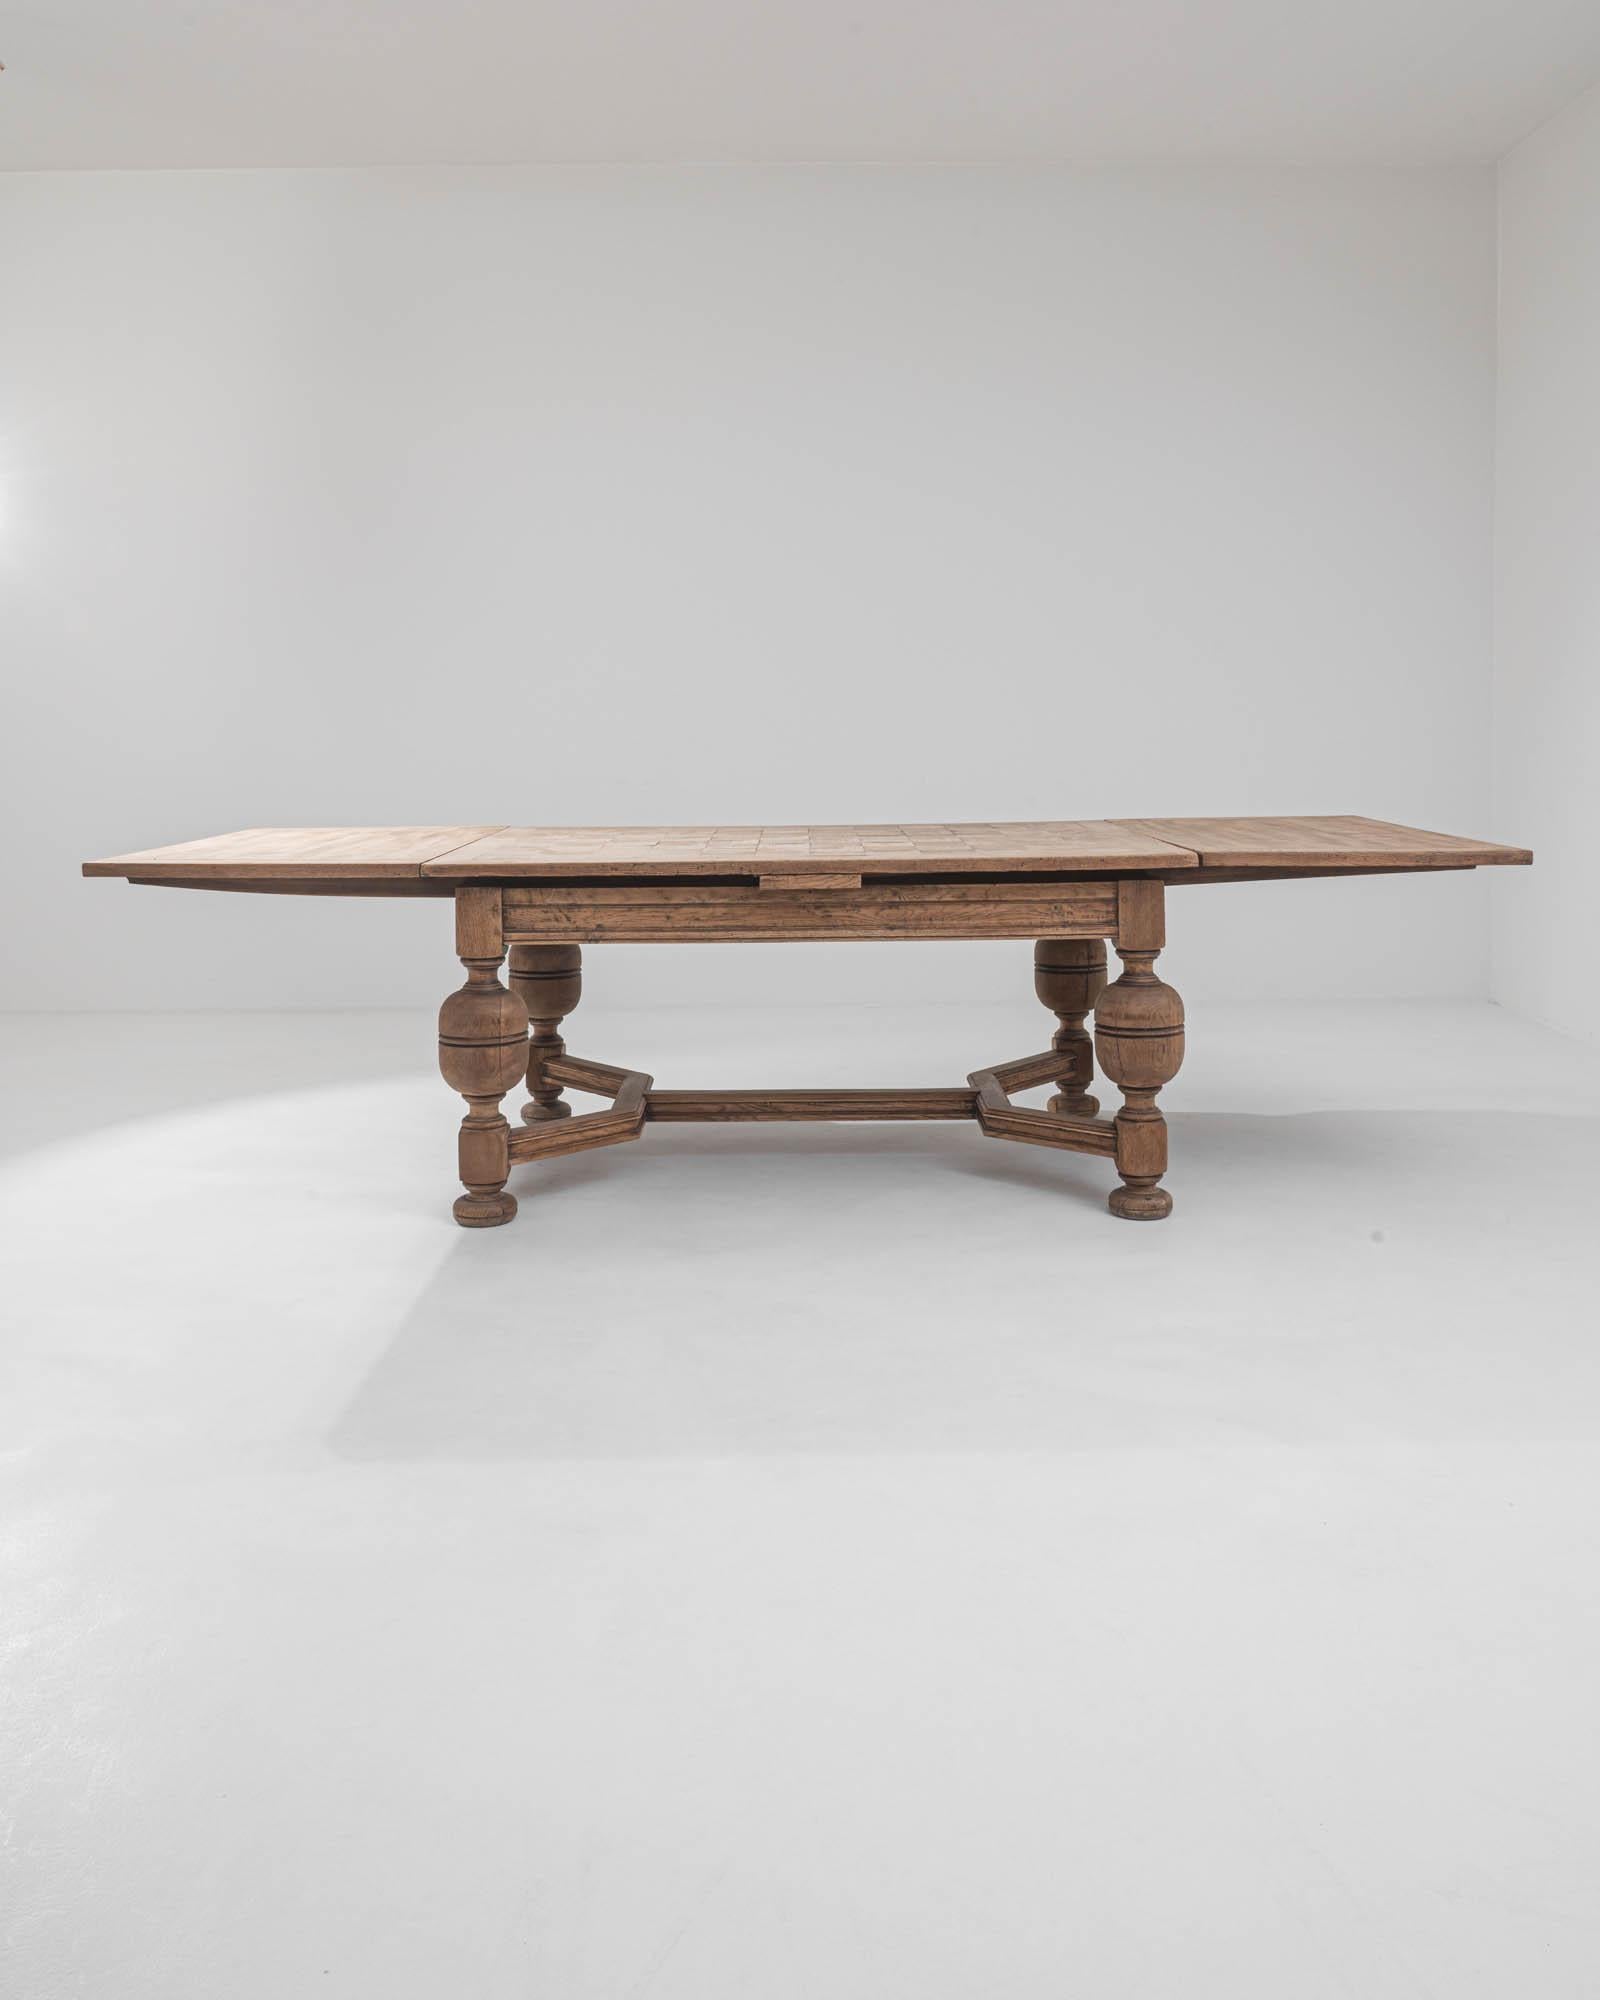 A folding wooden dining table created in 1900s Belgium. Characteristic of classic Belgian style, this table blends a sturdy solid construction with thoughtful, elegant design. The leaves of this table extend outwards to create an enormous dining